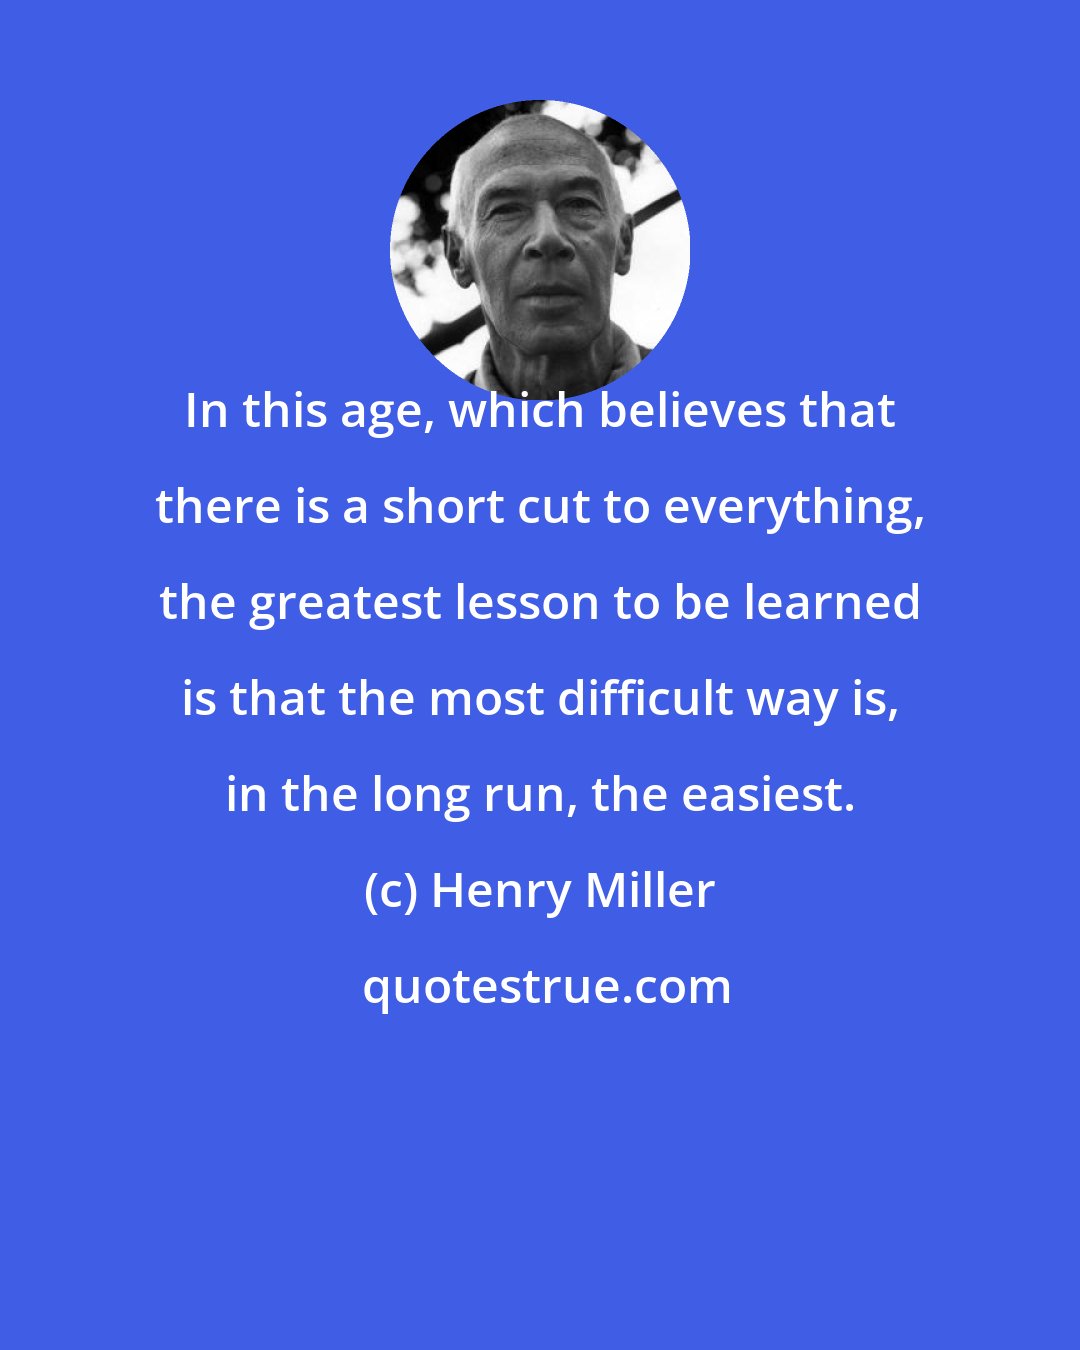 Henry Miller: In this age, which believes that there is a short cut to everything, the greatest lesson to be learned is that the most difficult way is, in the long run, the easiest.